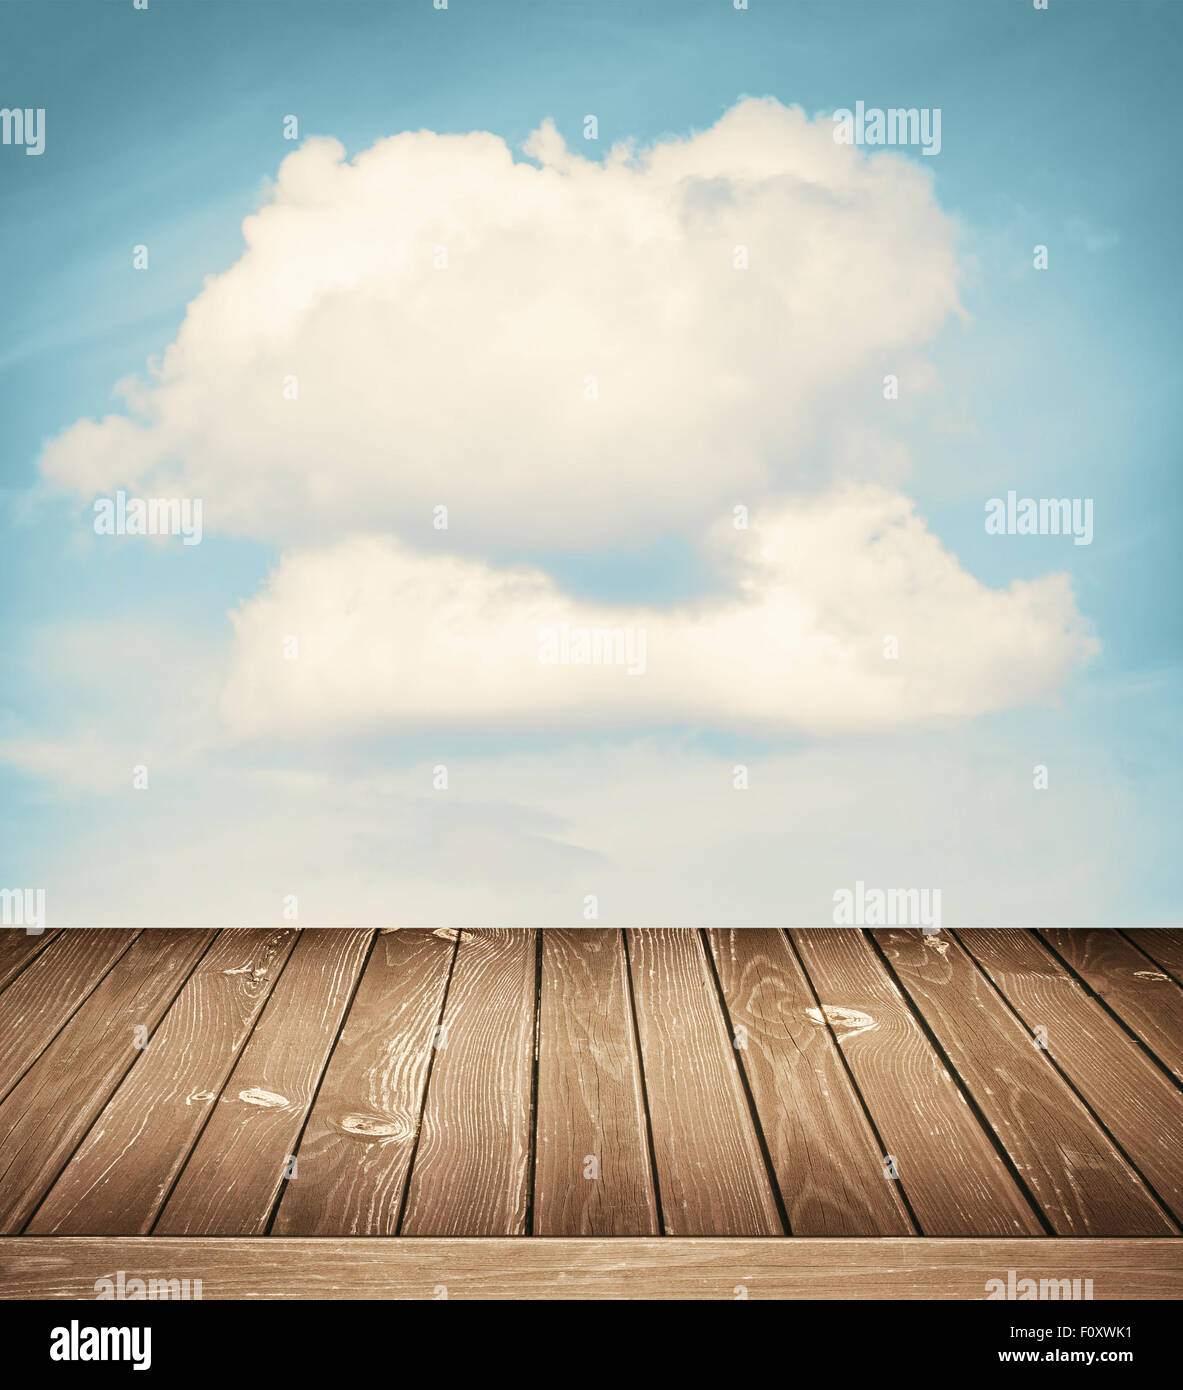 Sunny sky with clouds and wooden floor background Stock Photo